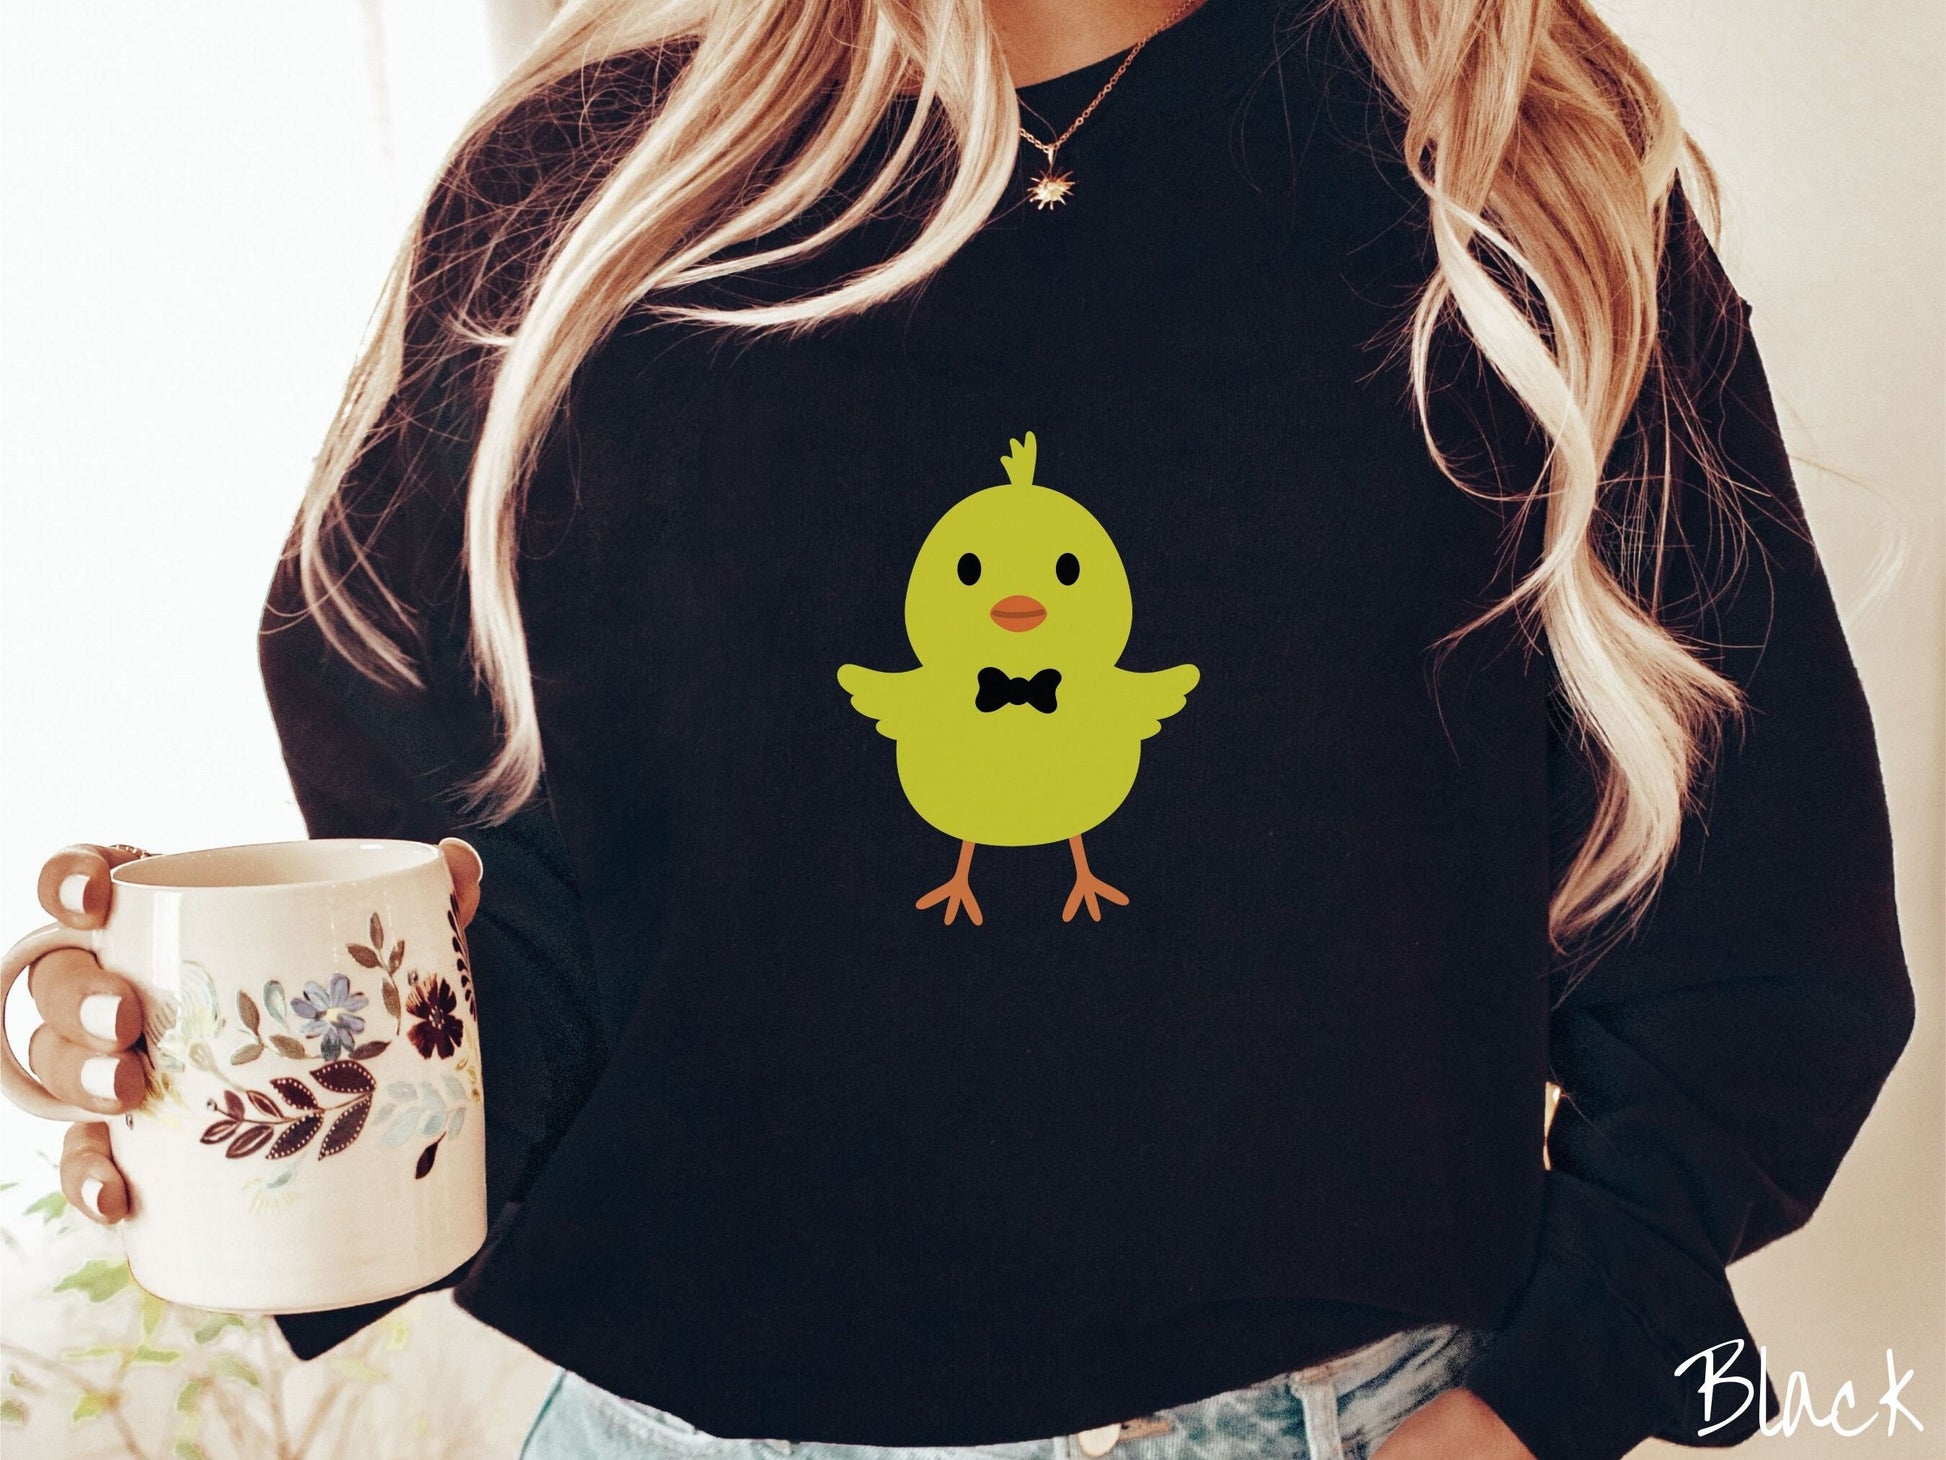 A woman wearing a cute, vintage black colored sweatshirt with a yellow baby chick with a black bowtie and its wings spread is standing and smiling. It has an orange mouth and feet and yellow feathers sticking out the top of its head.